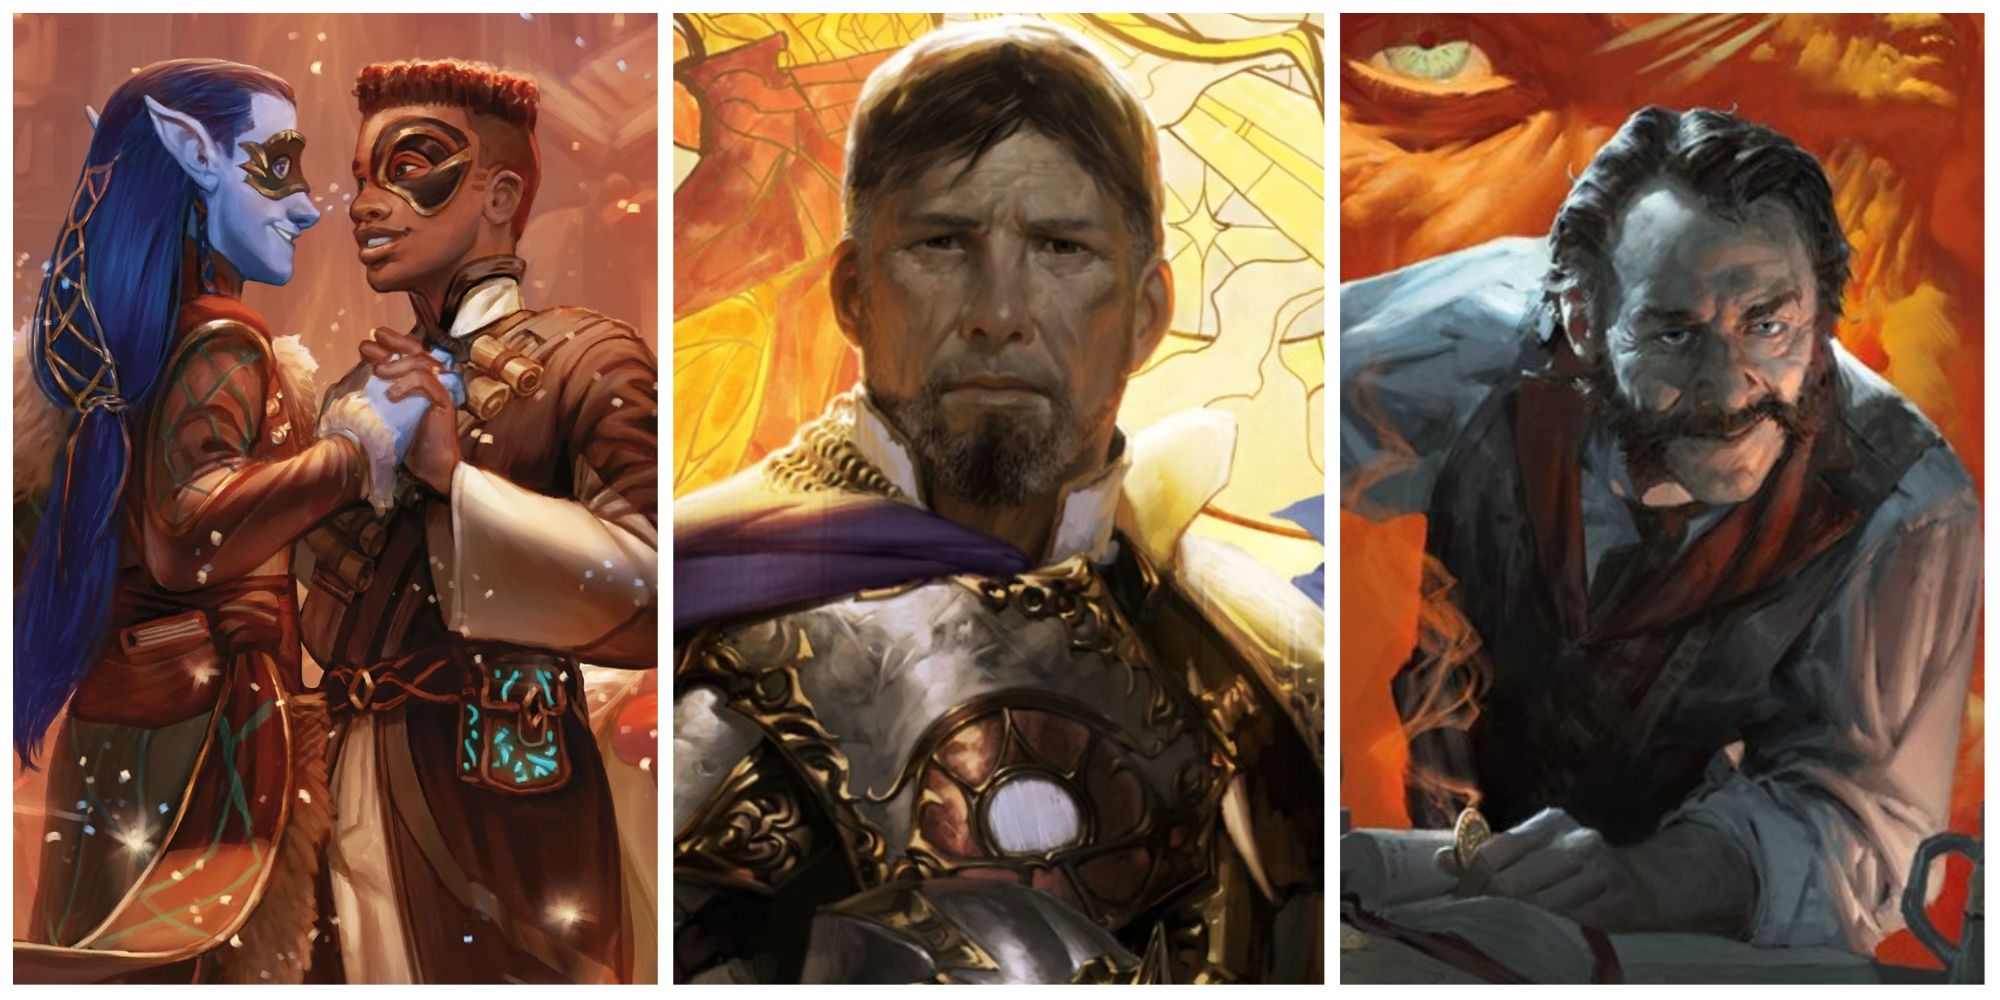 Dungeons and Dragons Tips Political Campaign Featured Image showing four different D&D characters